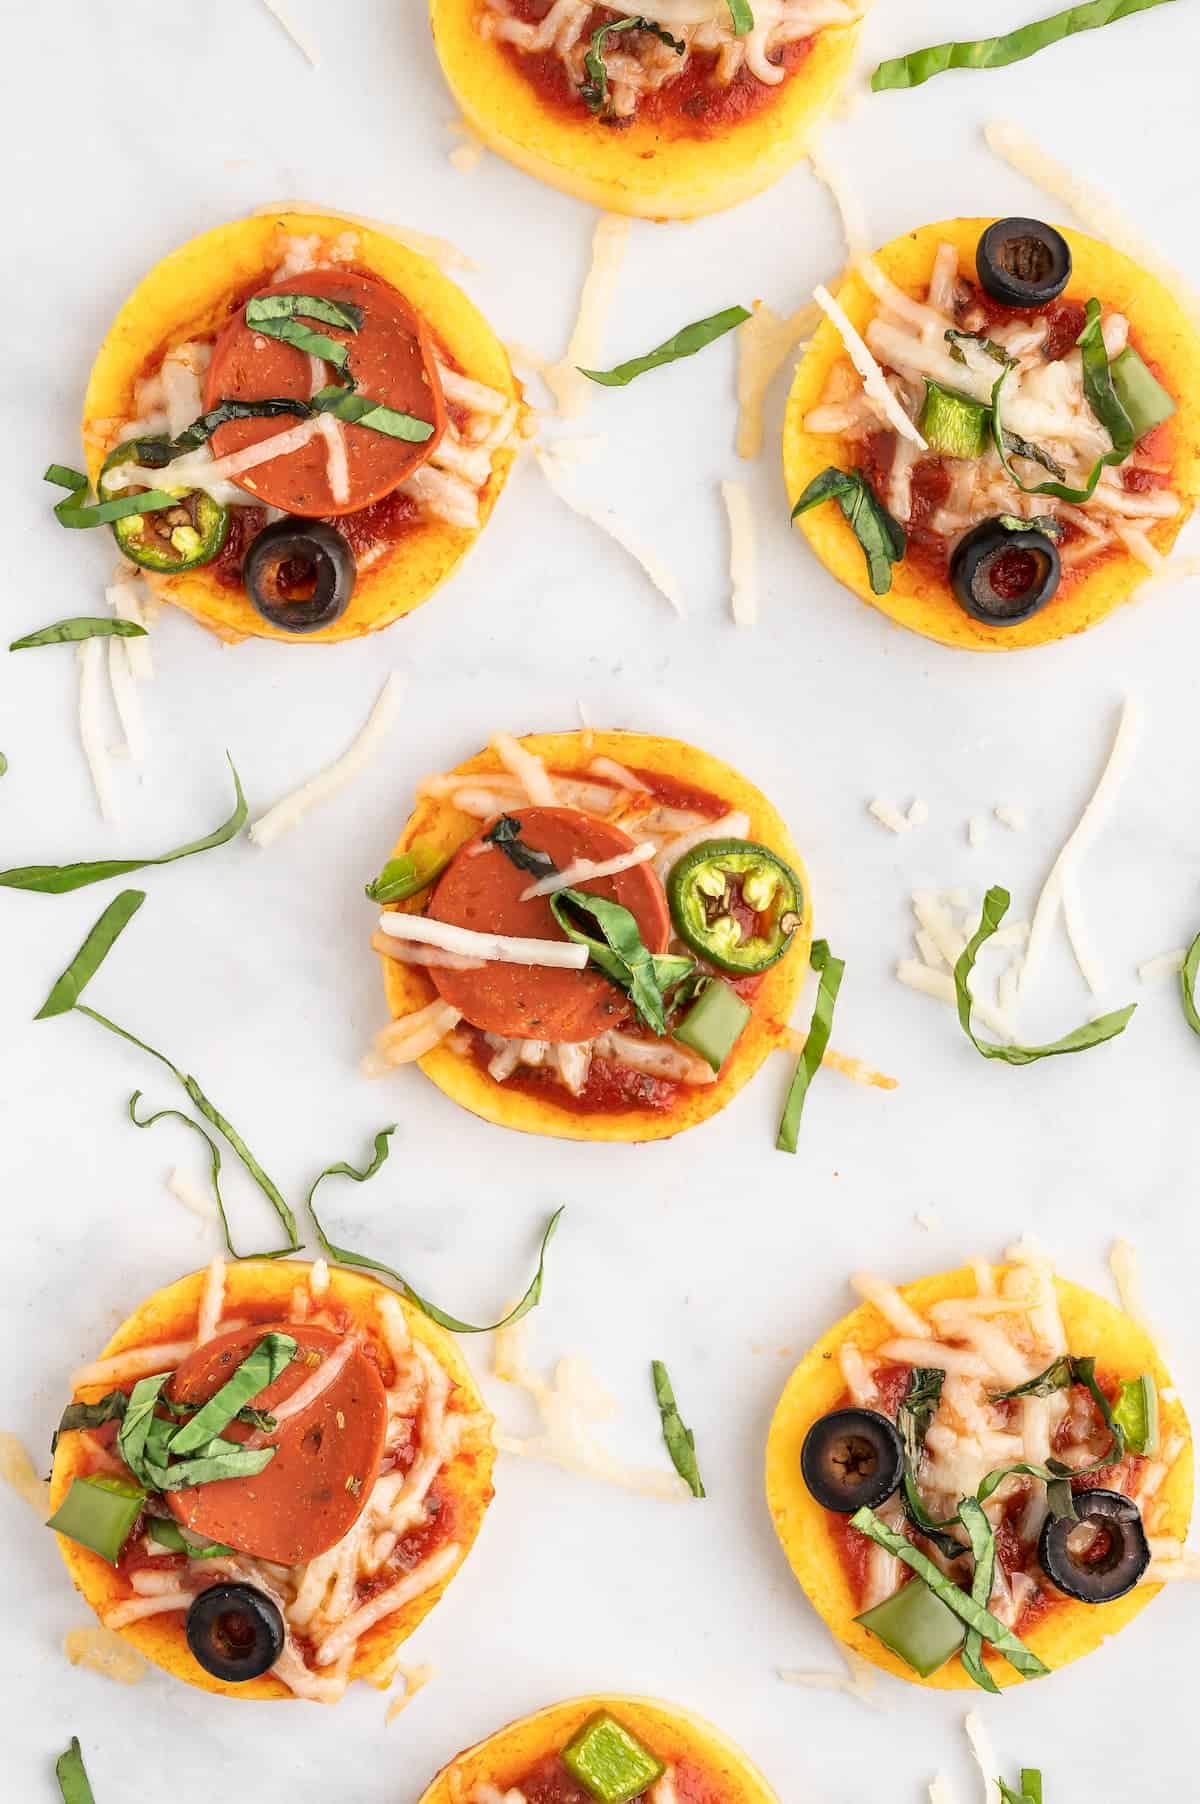 Polenta pizza bites, with melted vegan cheese abd toppings.